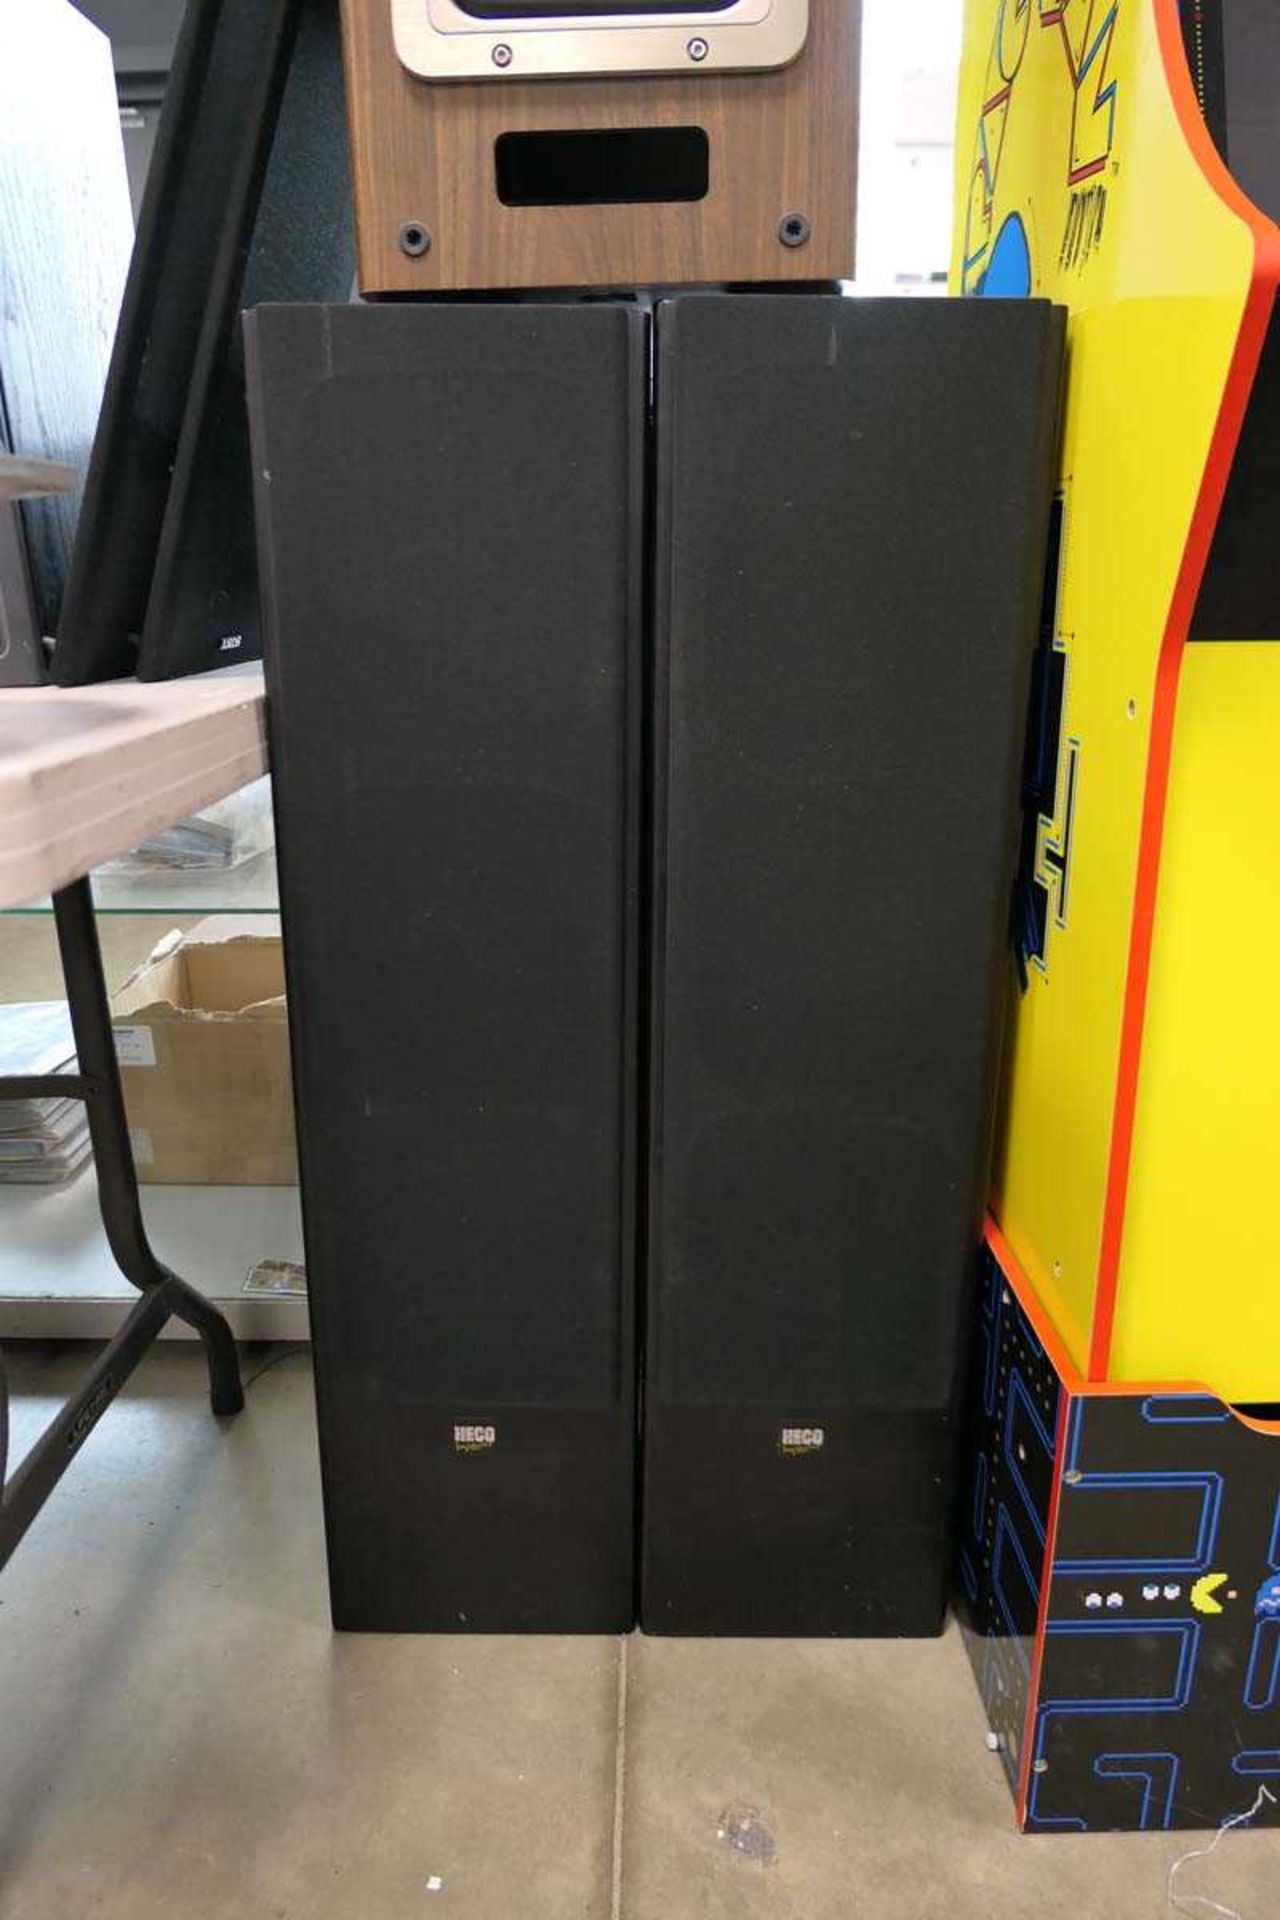 Pair of Heco superior floor standing speakers with covers